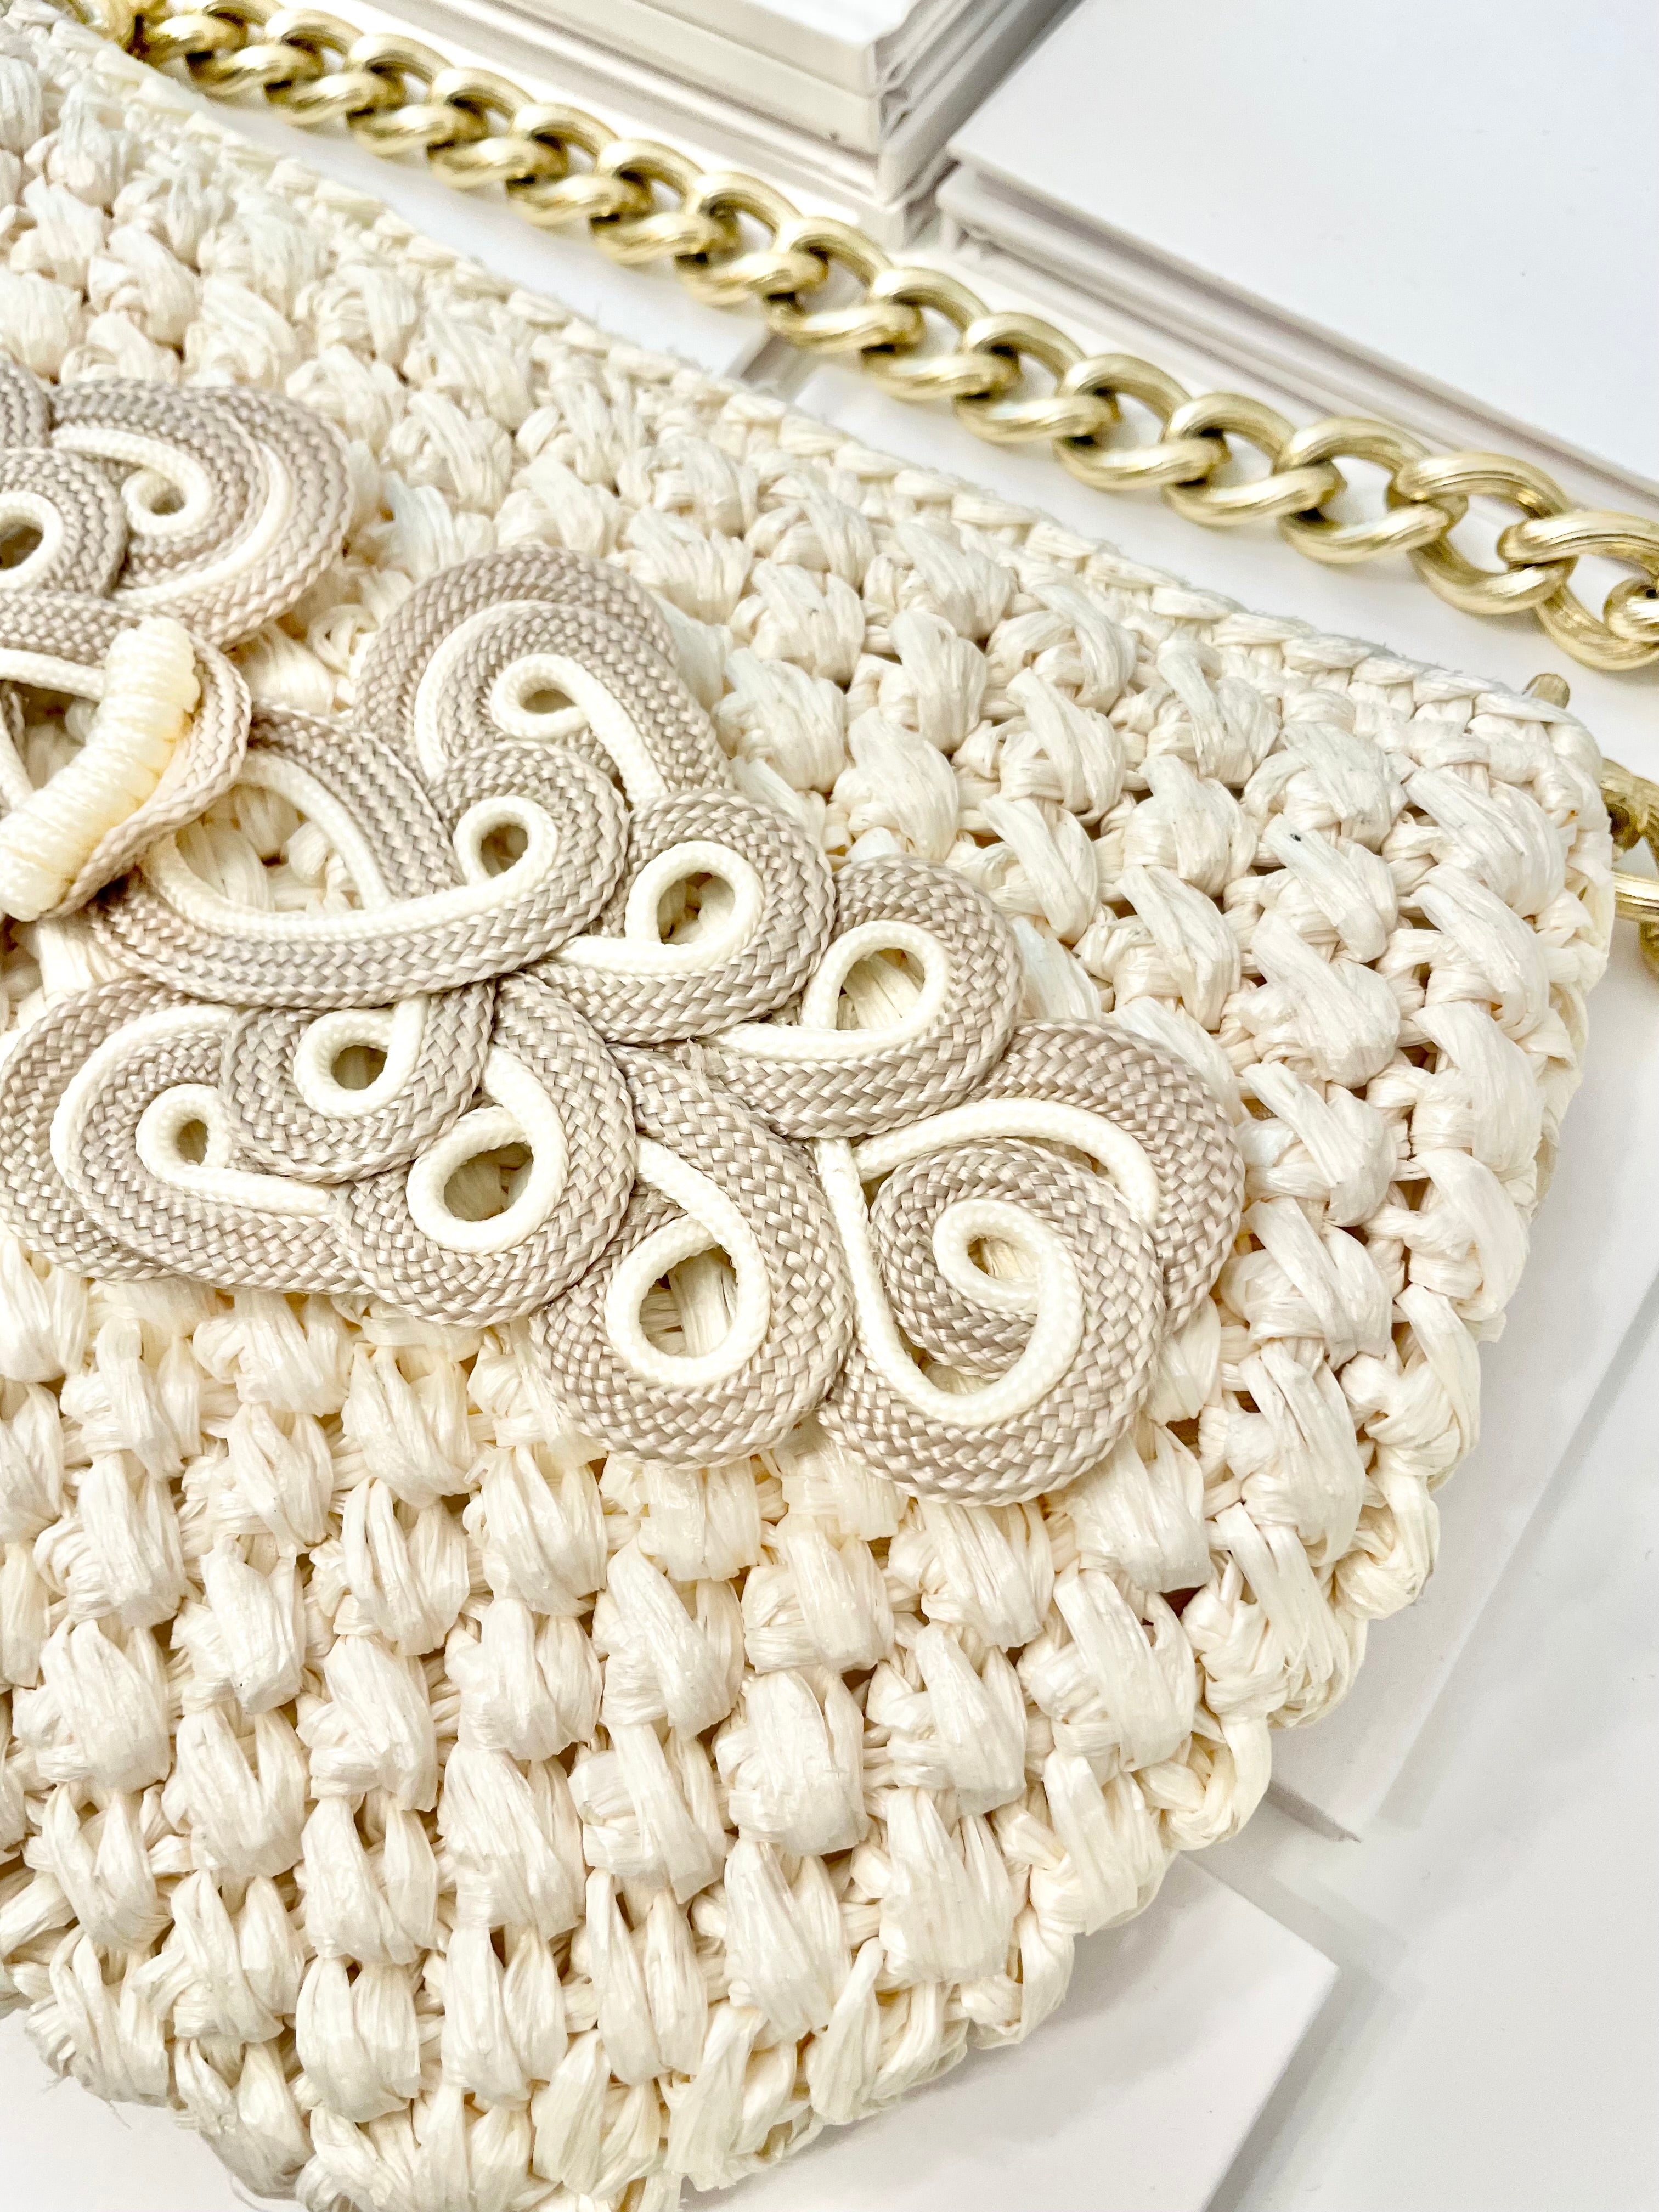 Vintage super sassy 1960's ivory straw bag with a classy gold chain... so elegant.